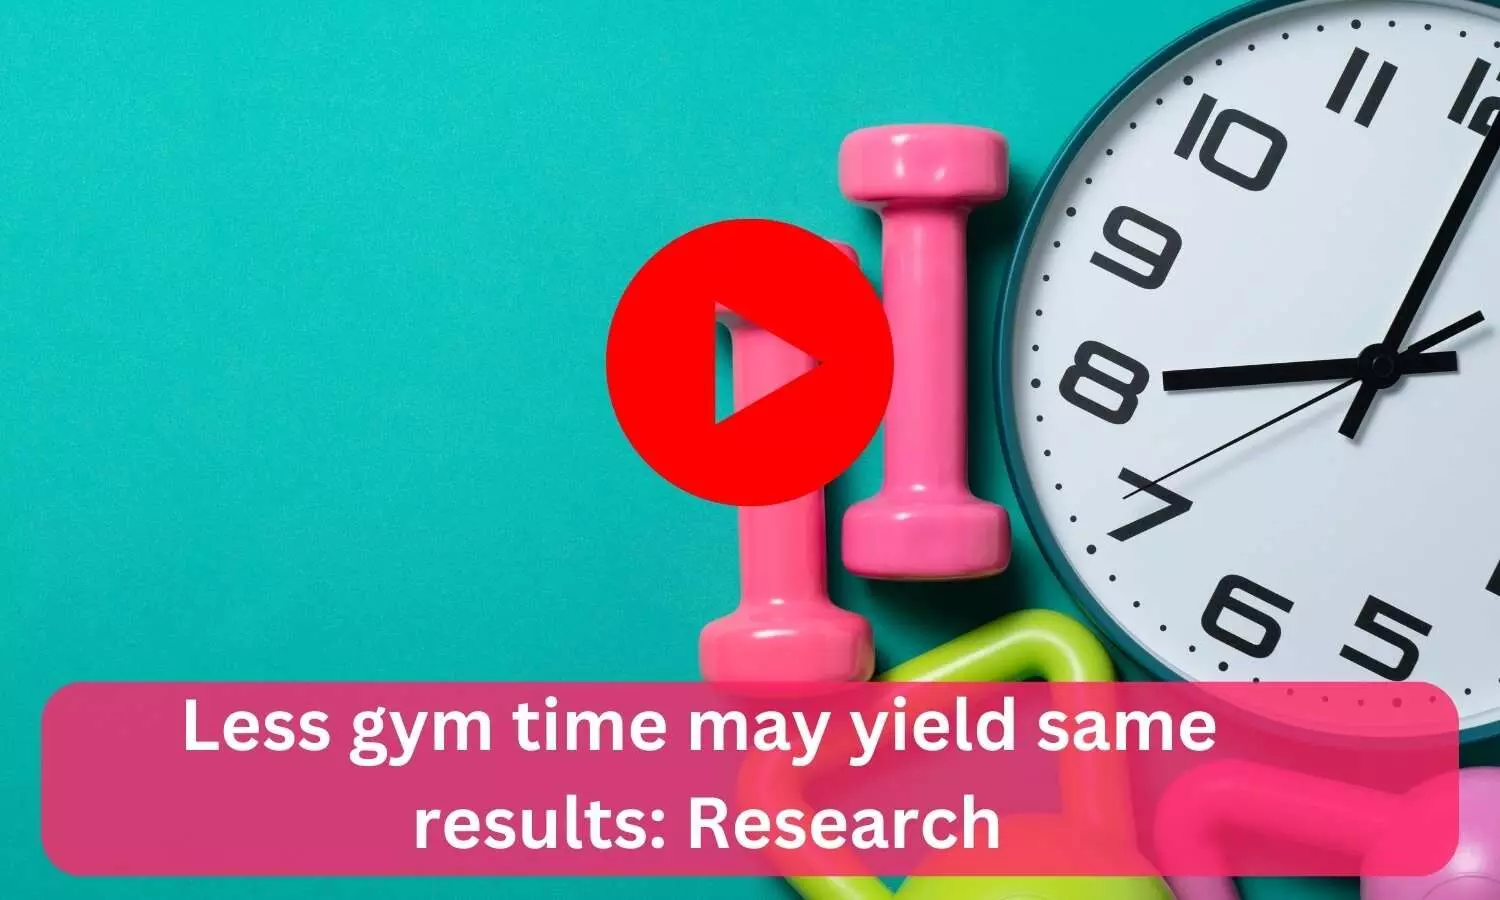 Less gym time may yield same results: Research